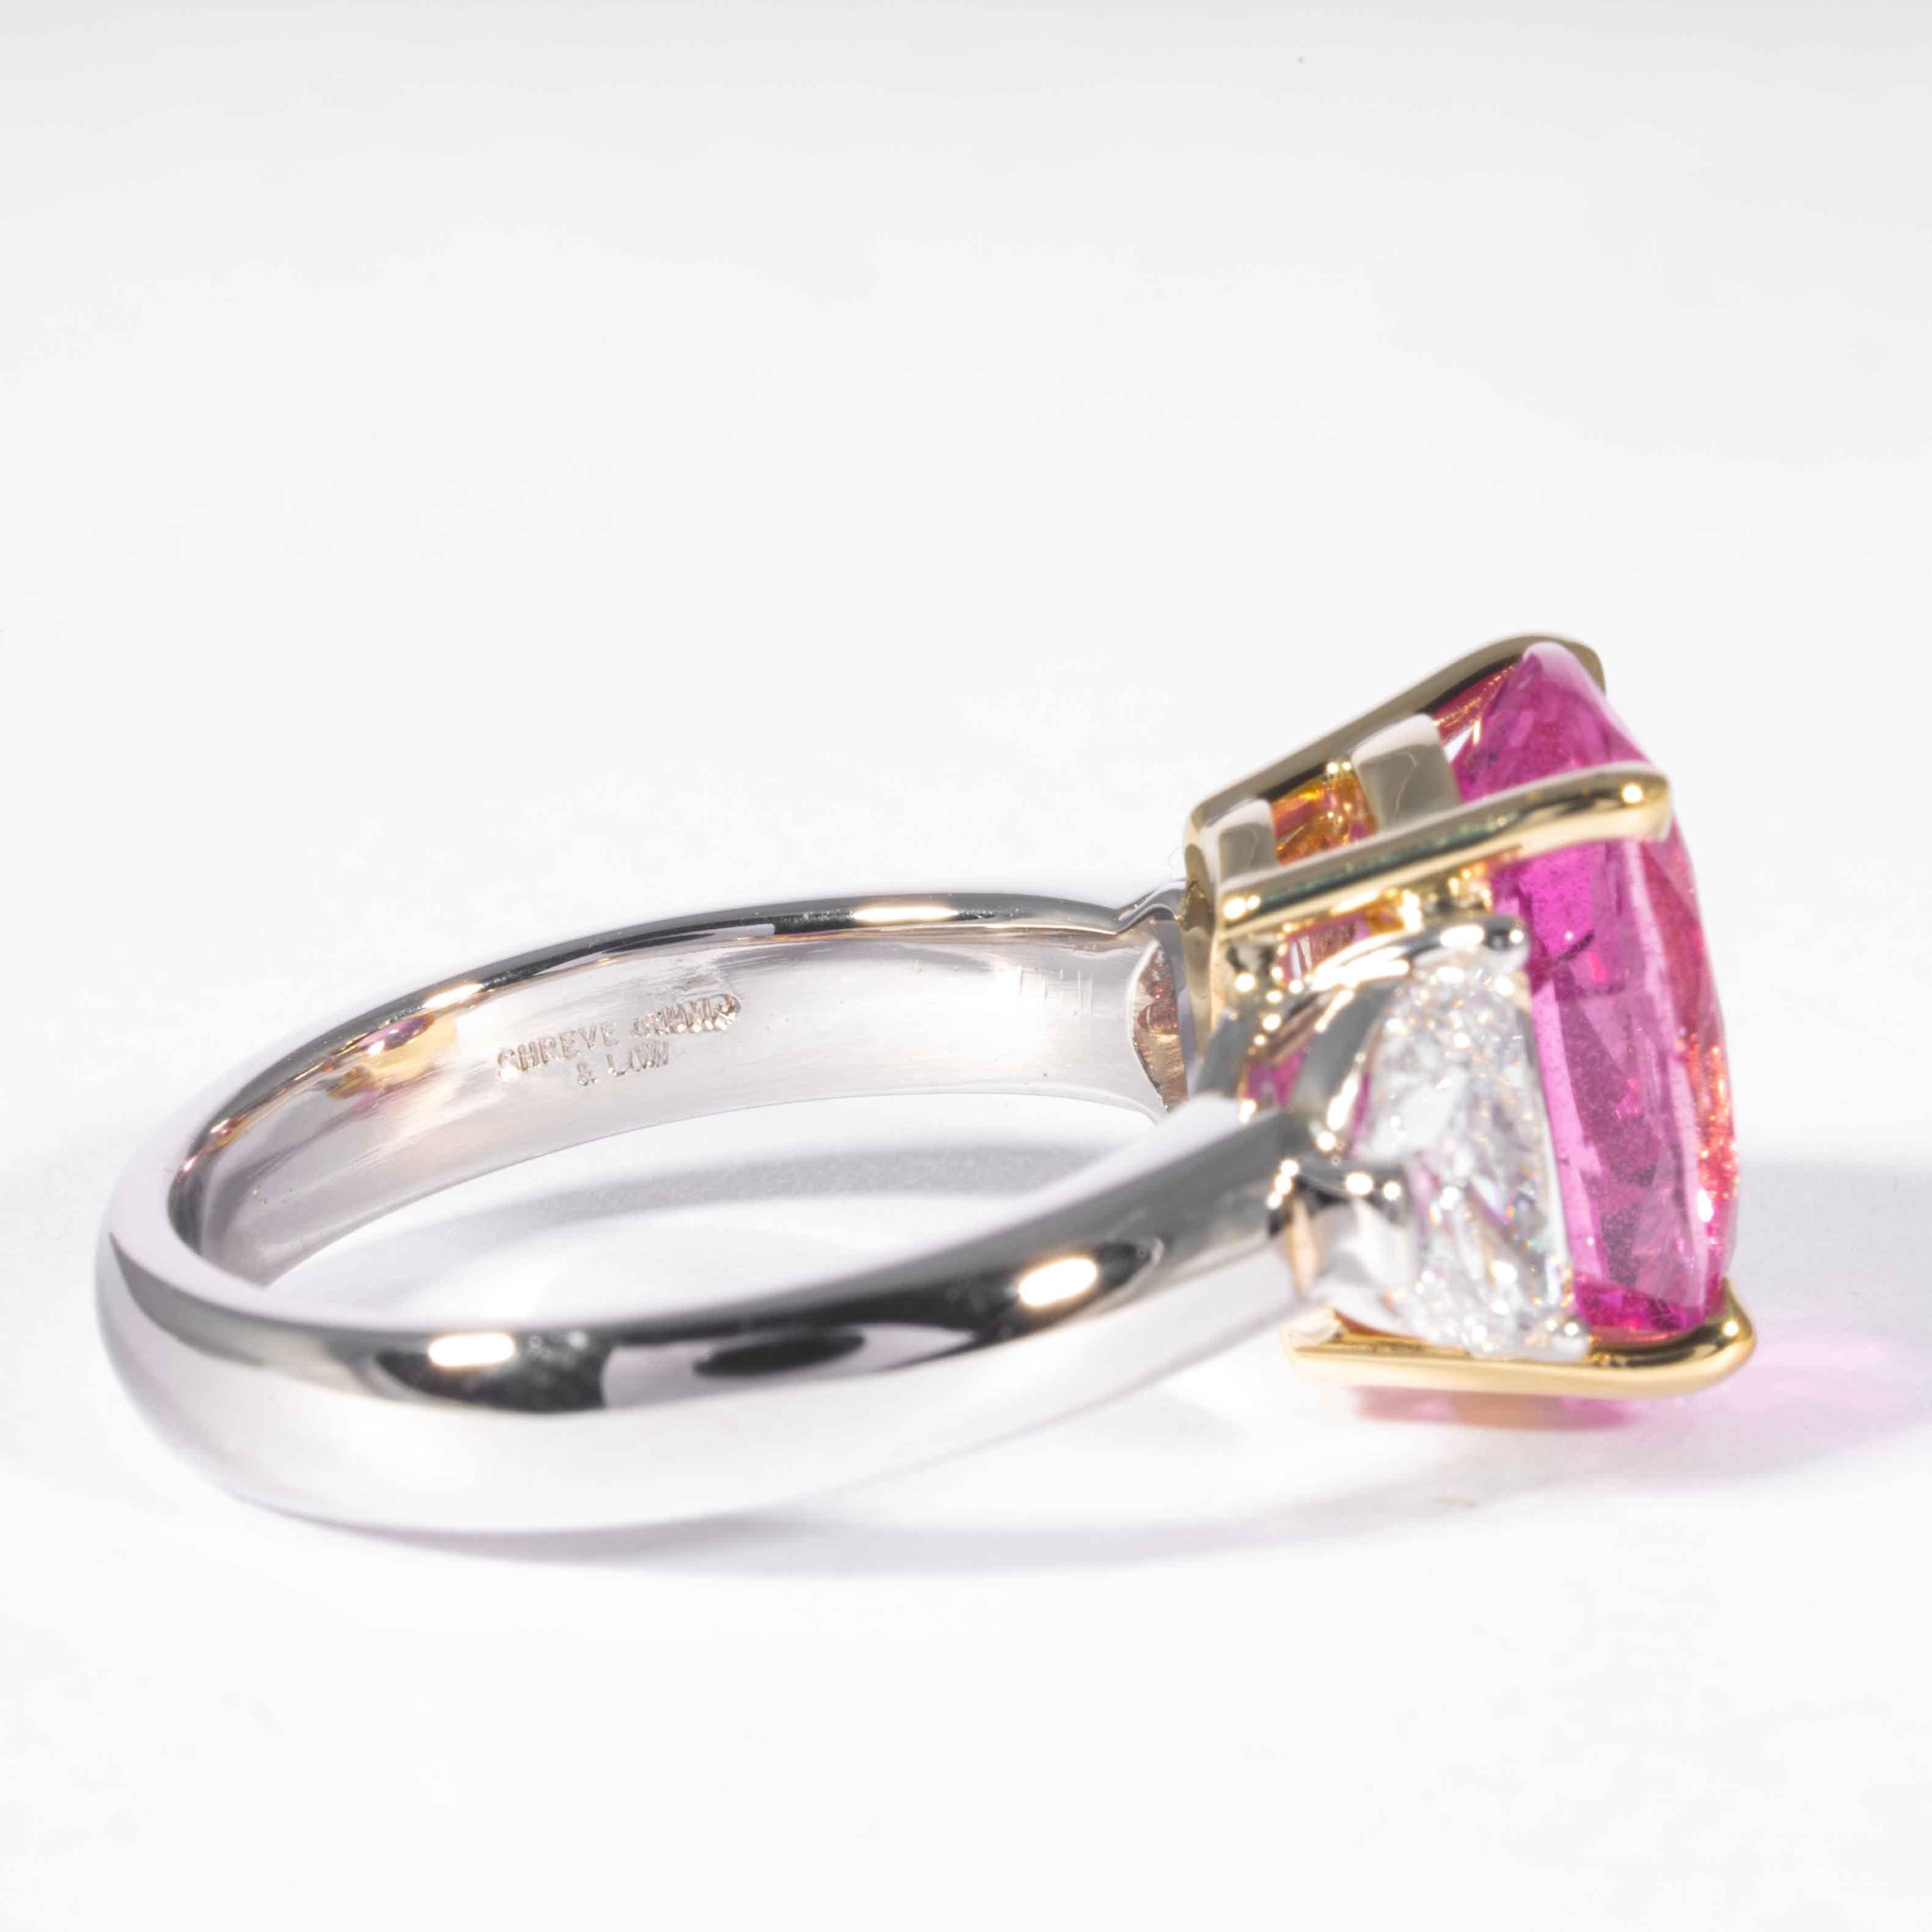 Shreve, Crump & Low 6.22 Carat Oval Cut Pink Sapphire and Diamond 3-Stone Ring For Sale 1